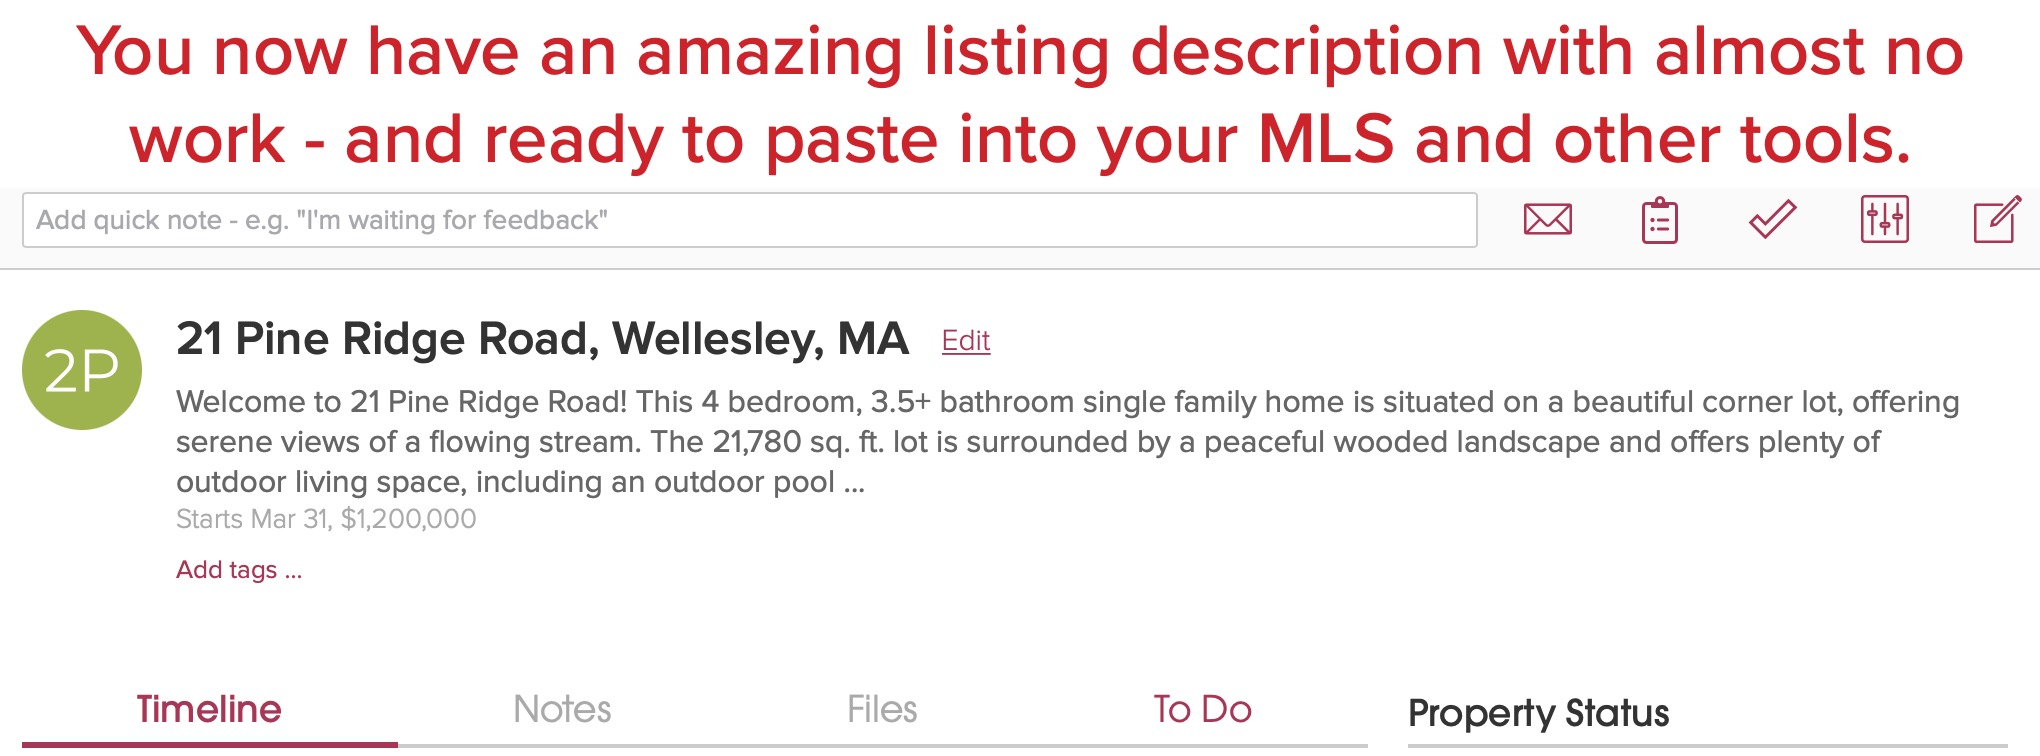 Cloze: You now have an amazing listing description with almost no work and ready to paste into your MLS and other tools. 